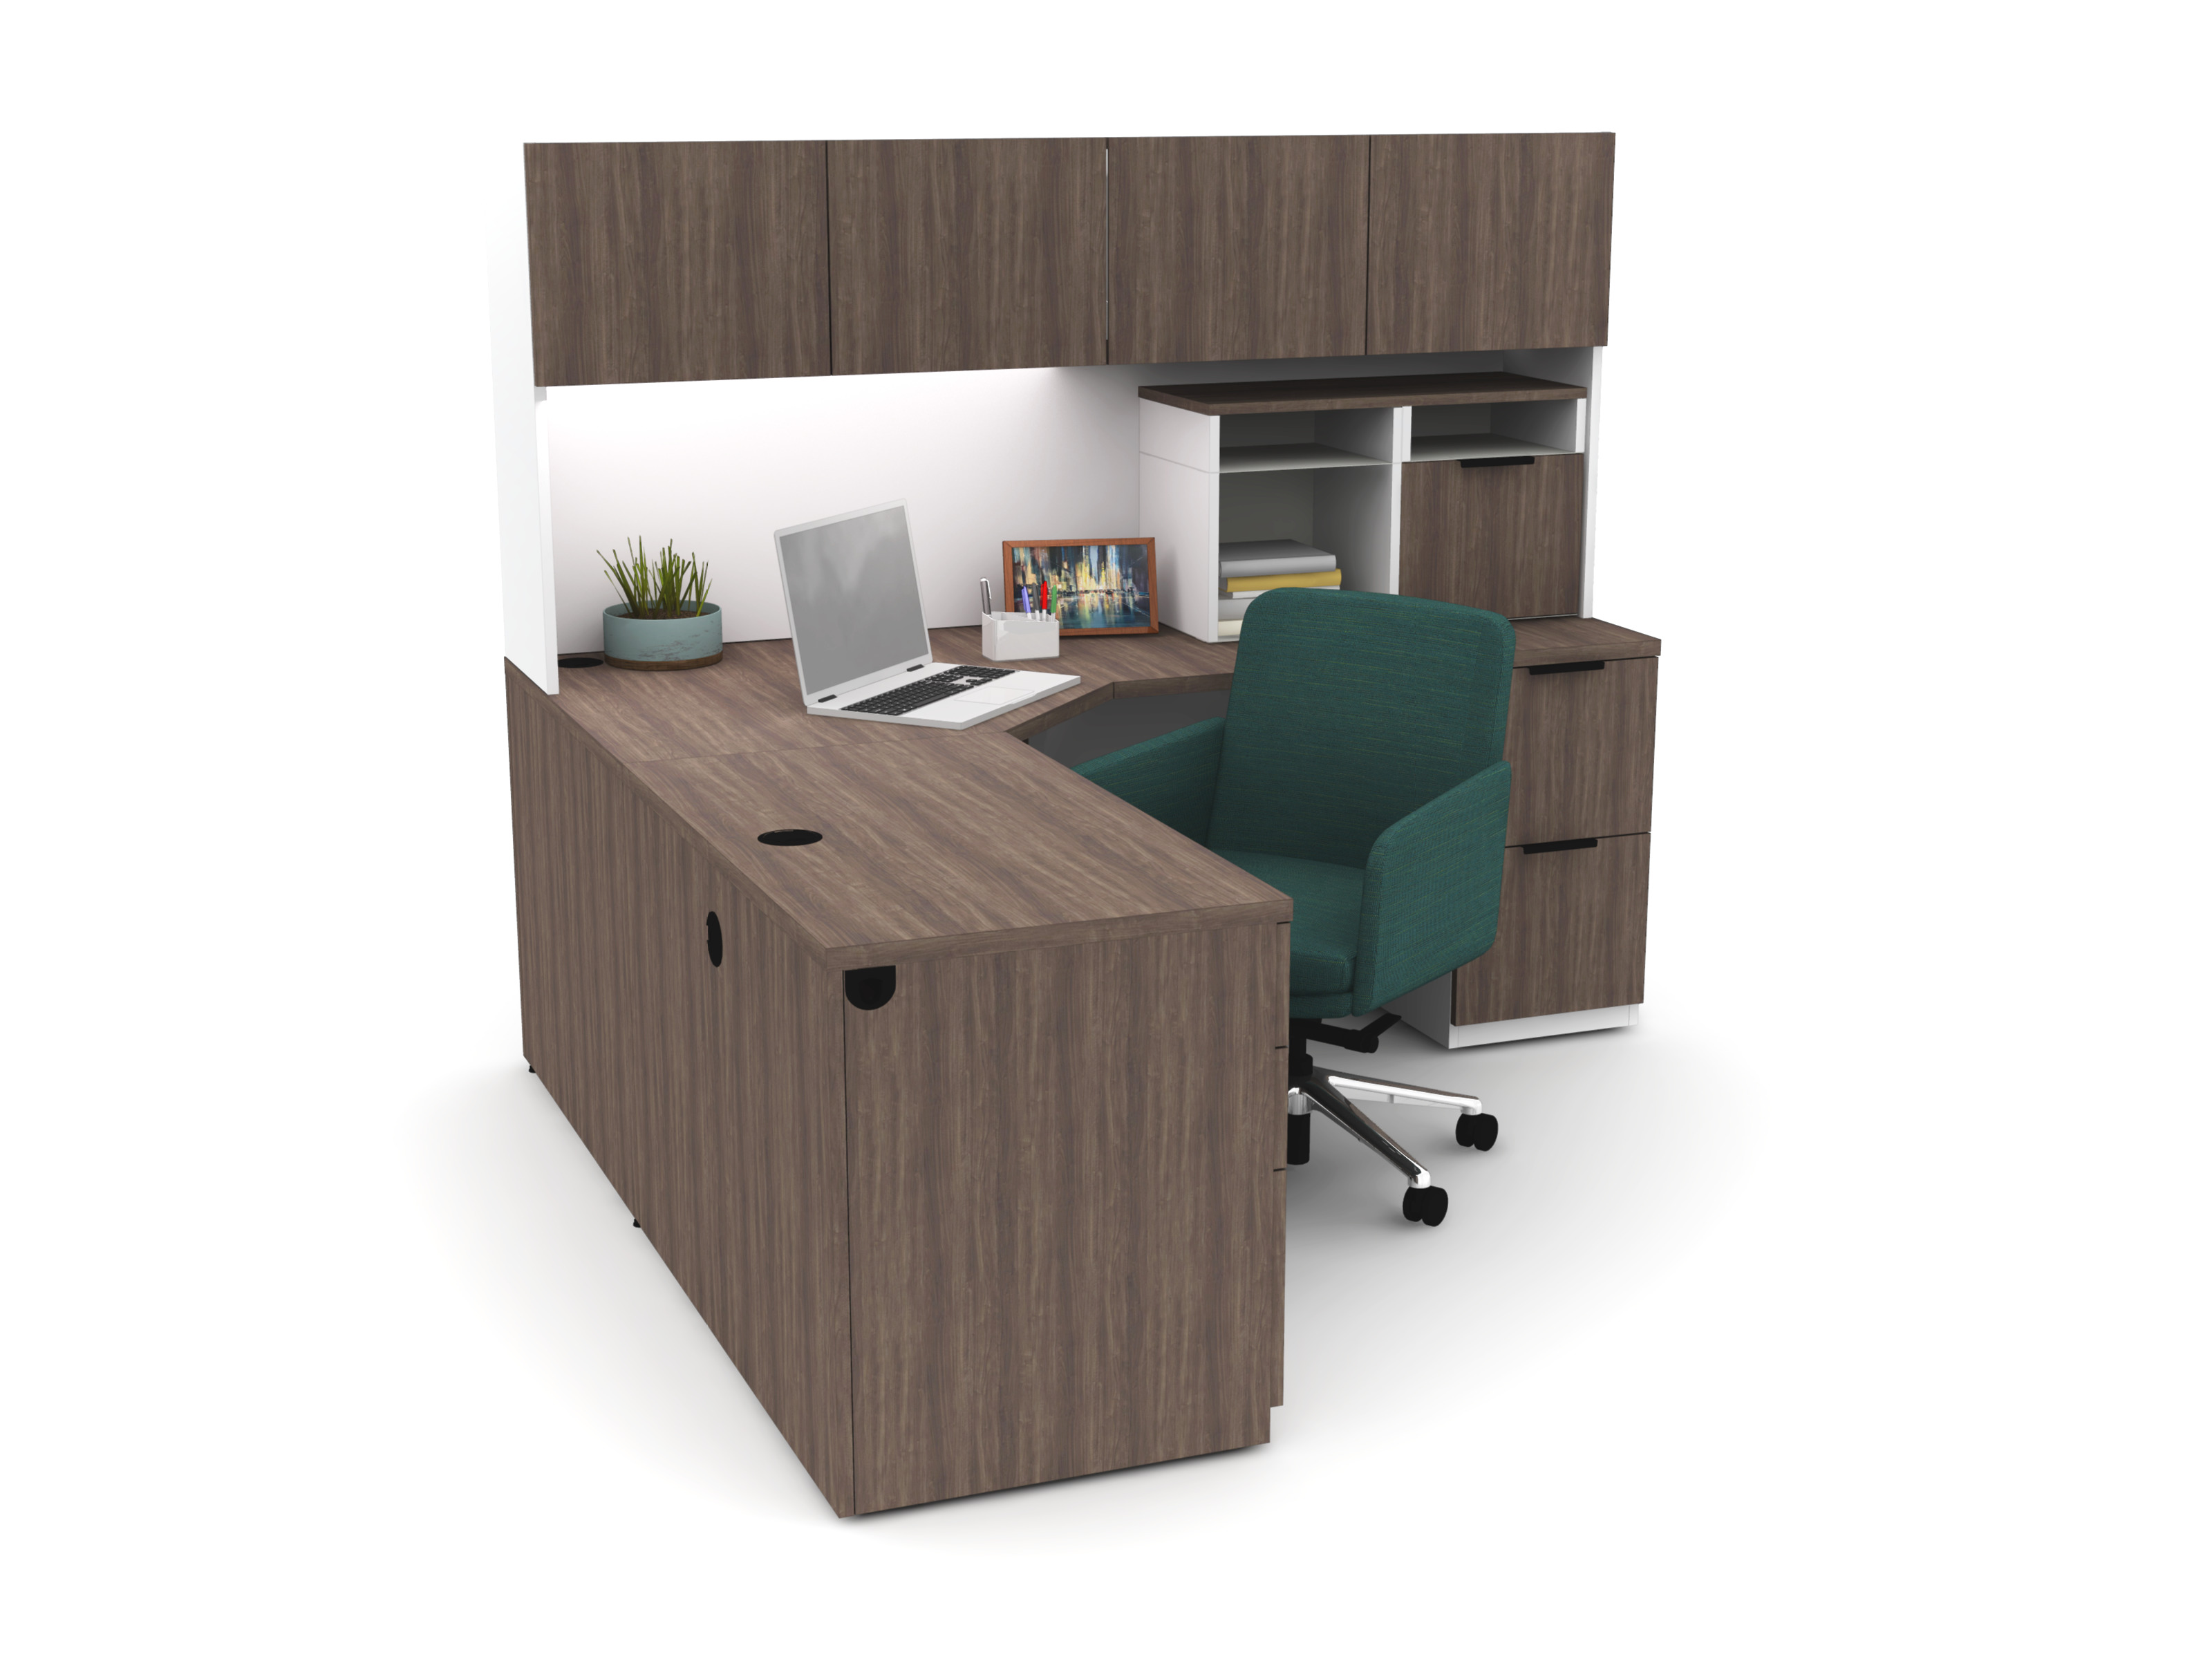 Concinnity - Small Corner Desk Planning Typical